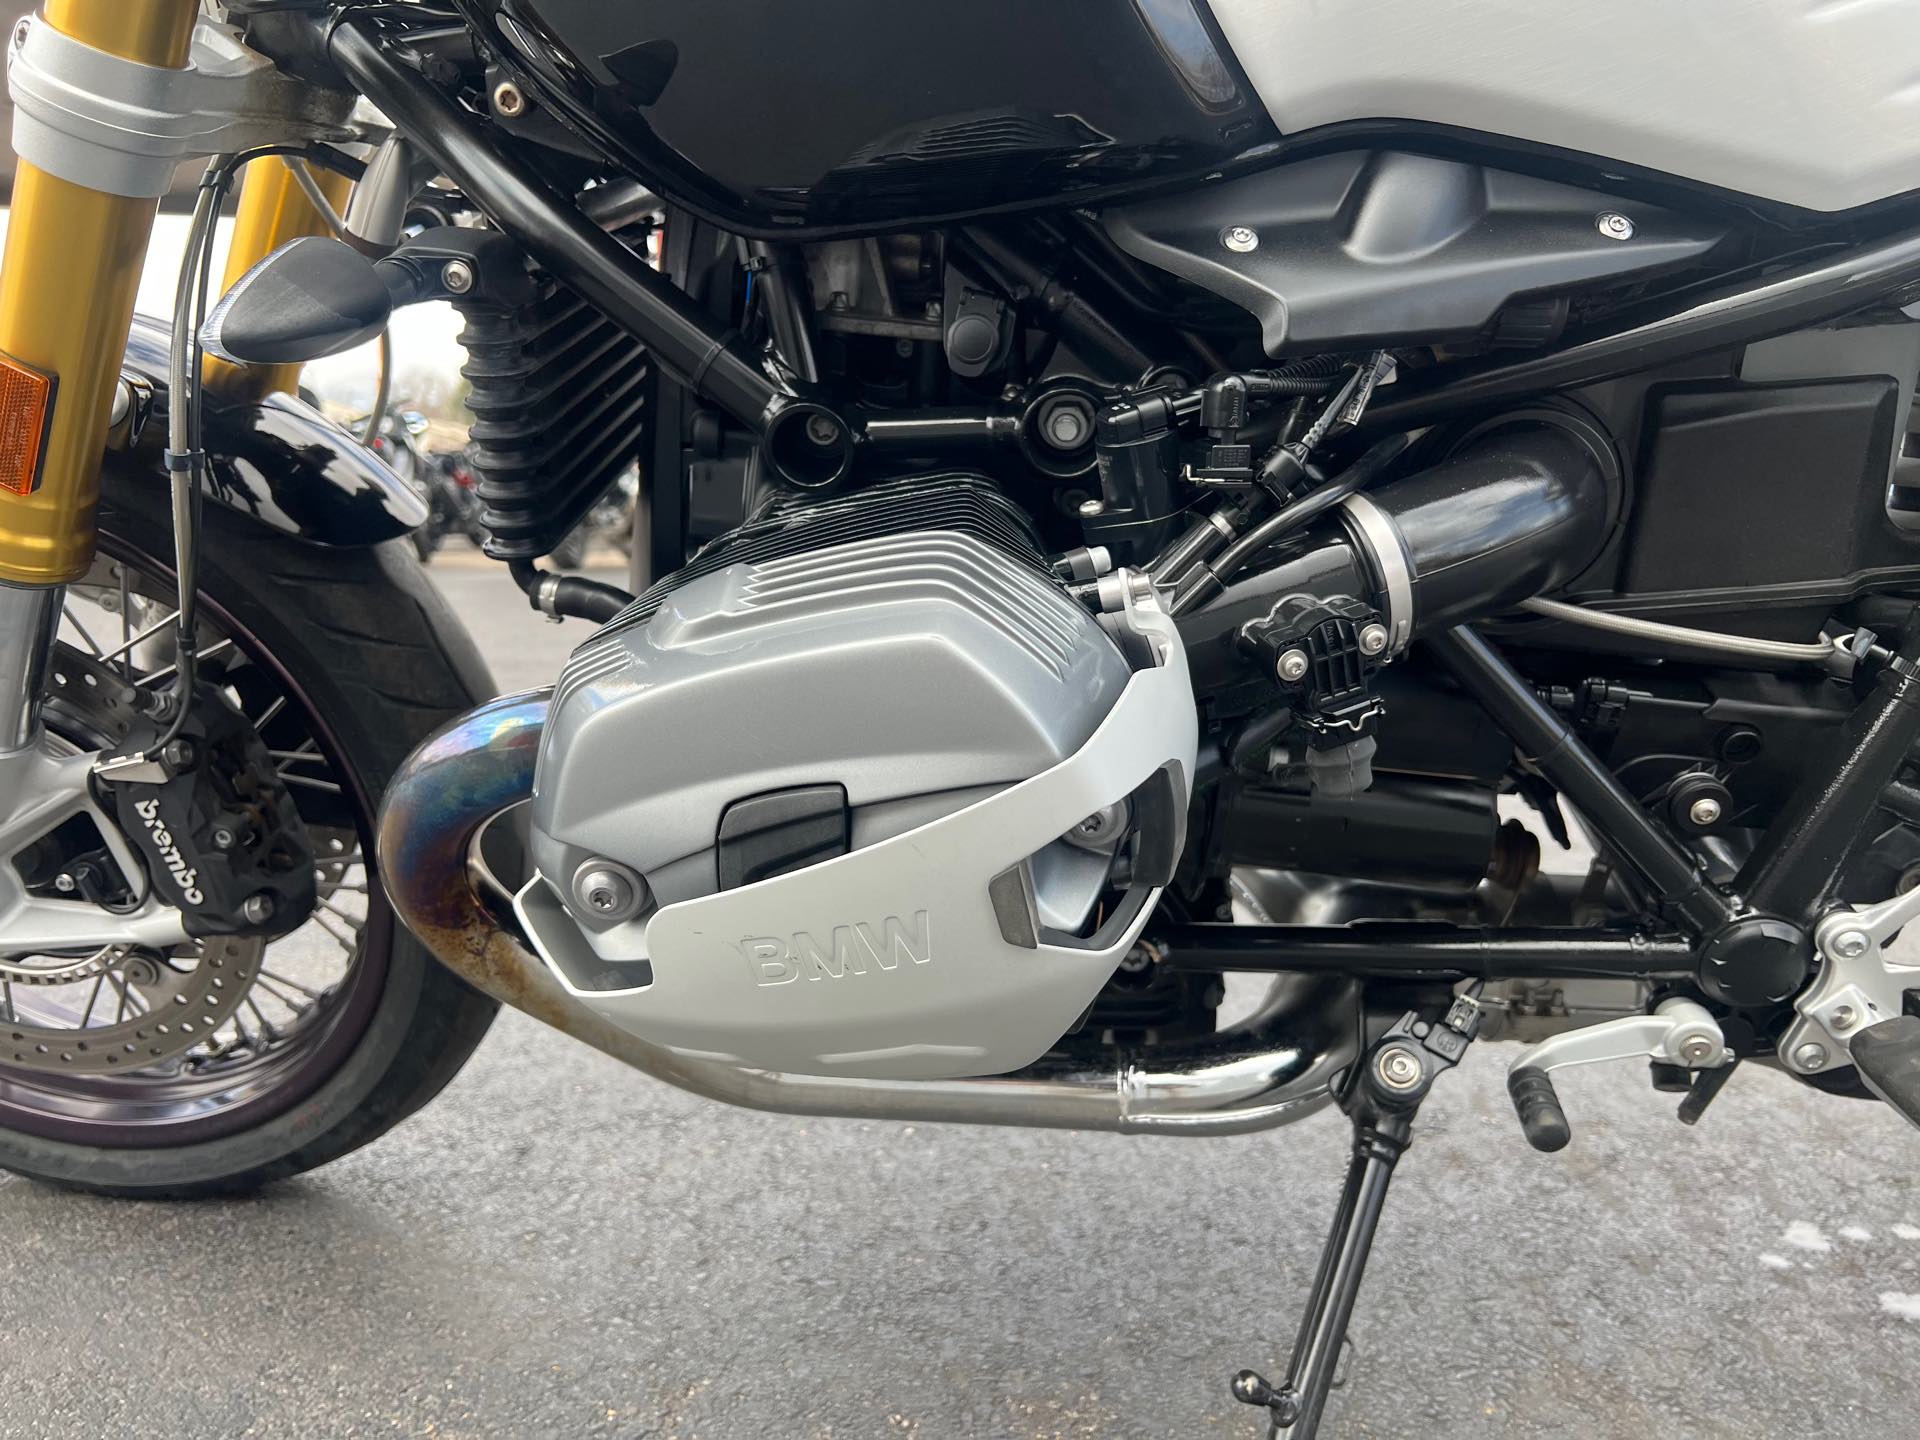 2015 BMW R R nineT at Aces Motorcycles - Fort Collins